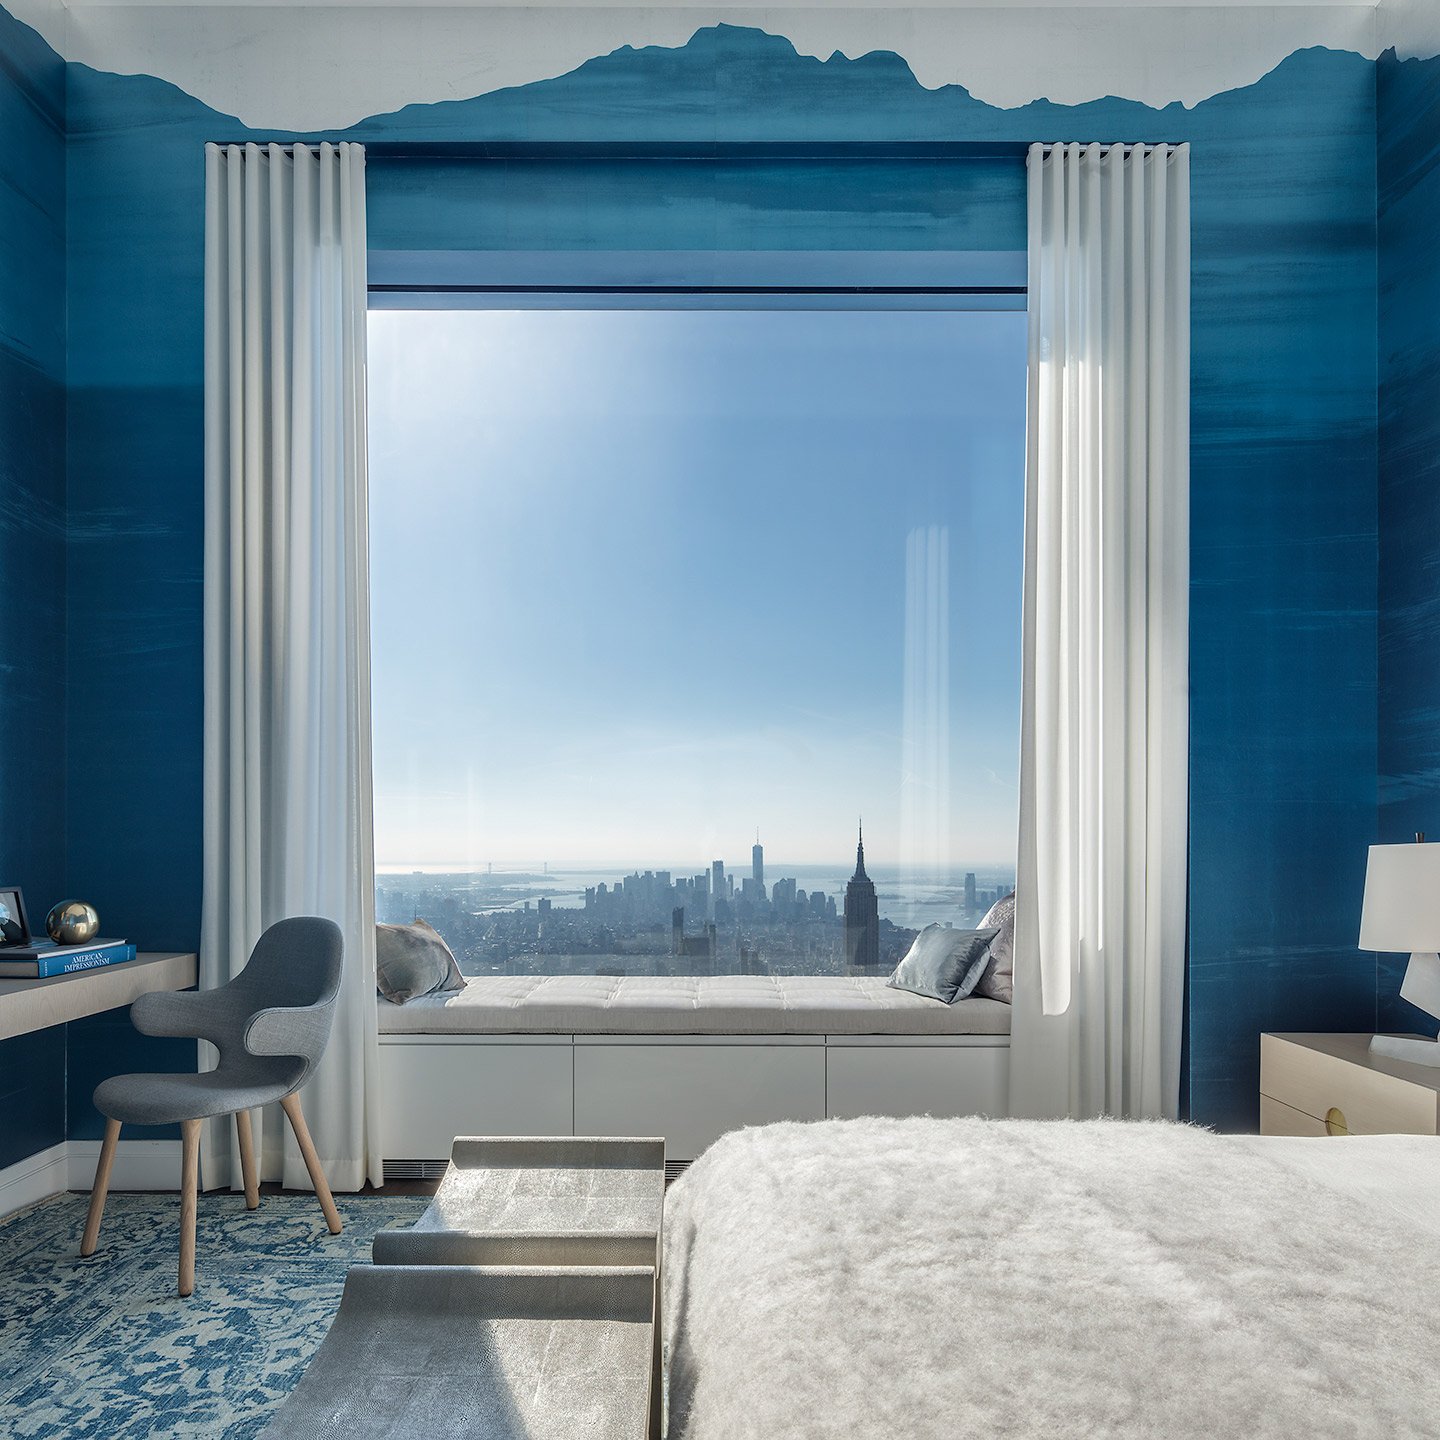 432 Park Avenue | © DBOX for Macklowe Properties and CIM Group